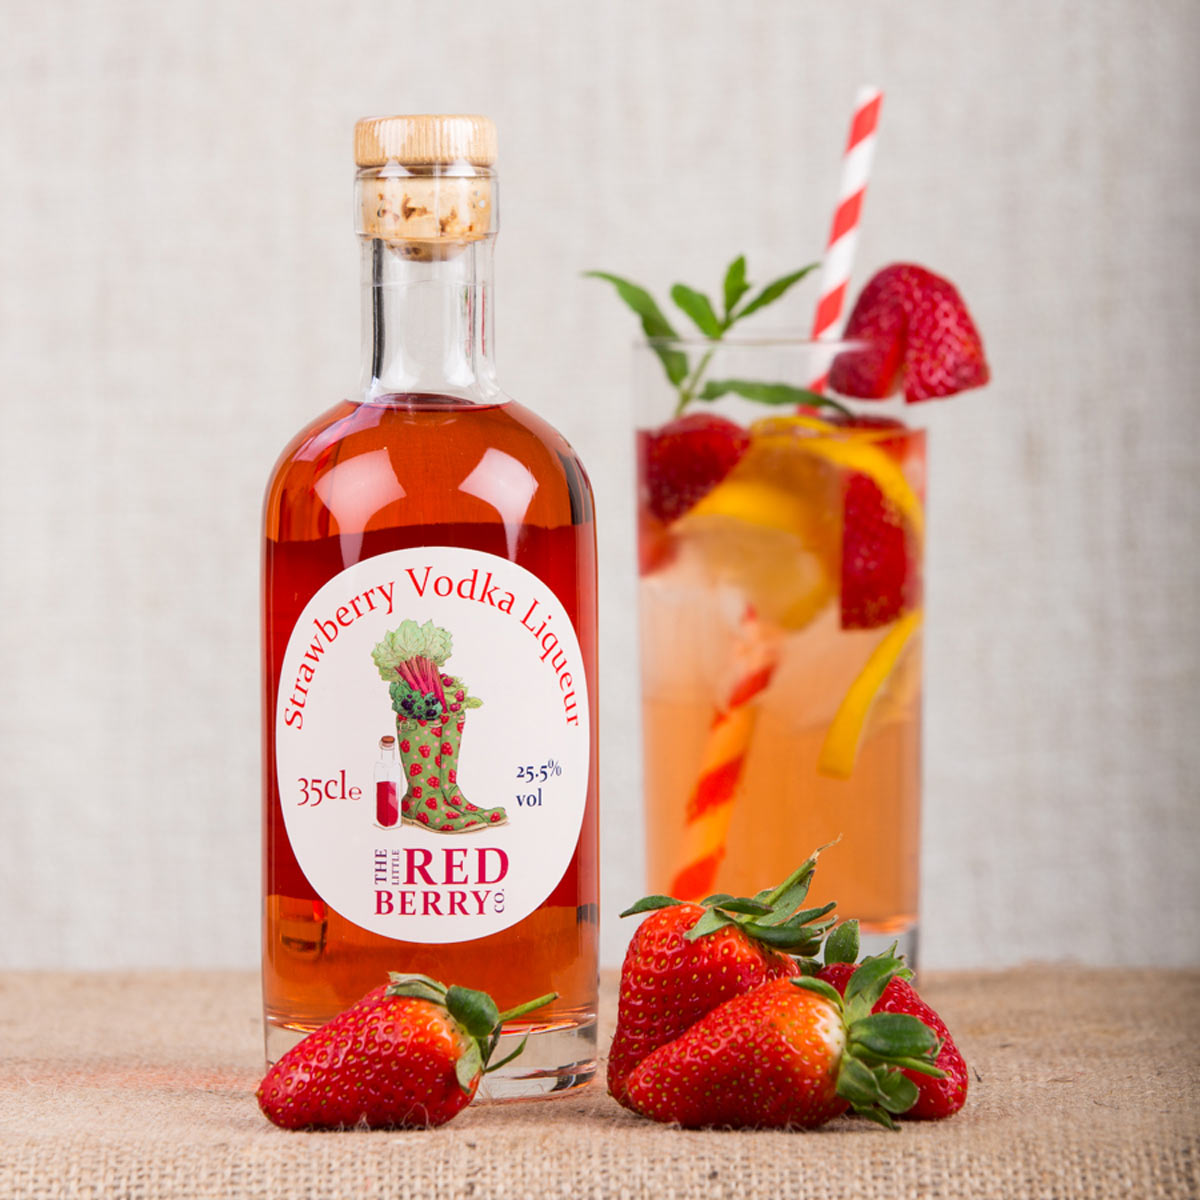 The Little Red Berry Company's award winning Strawberry Vodka Liqueur